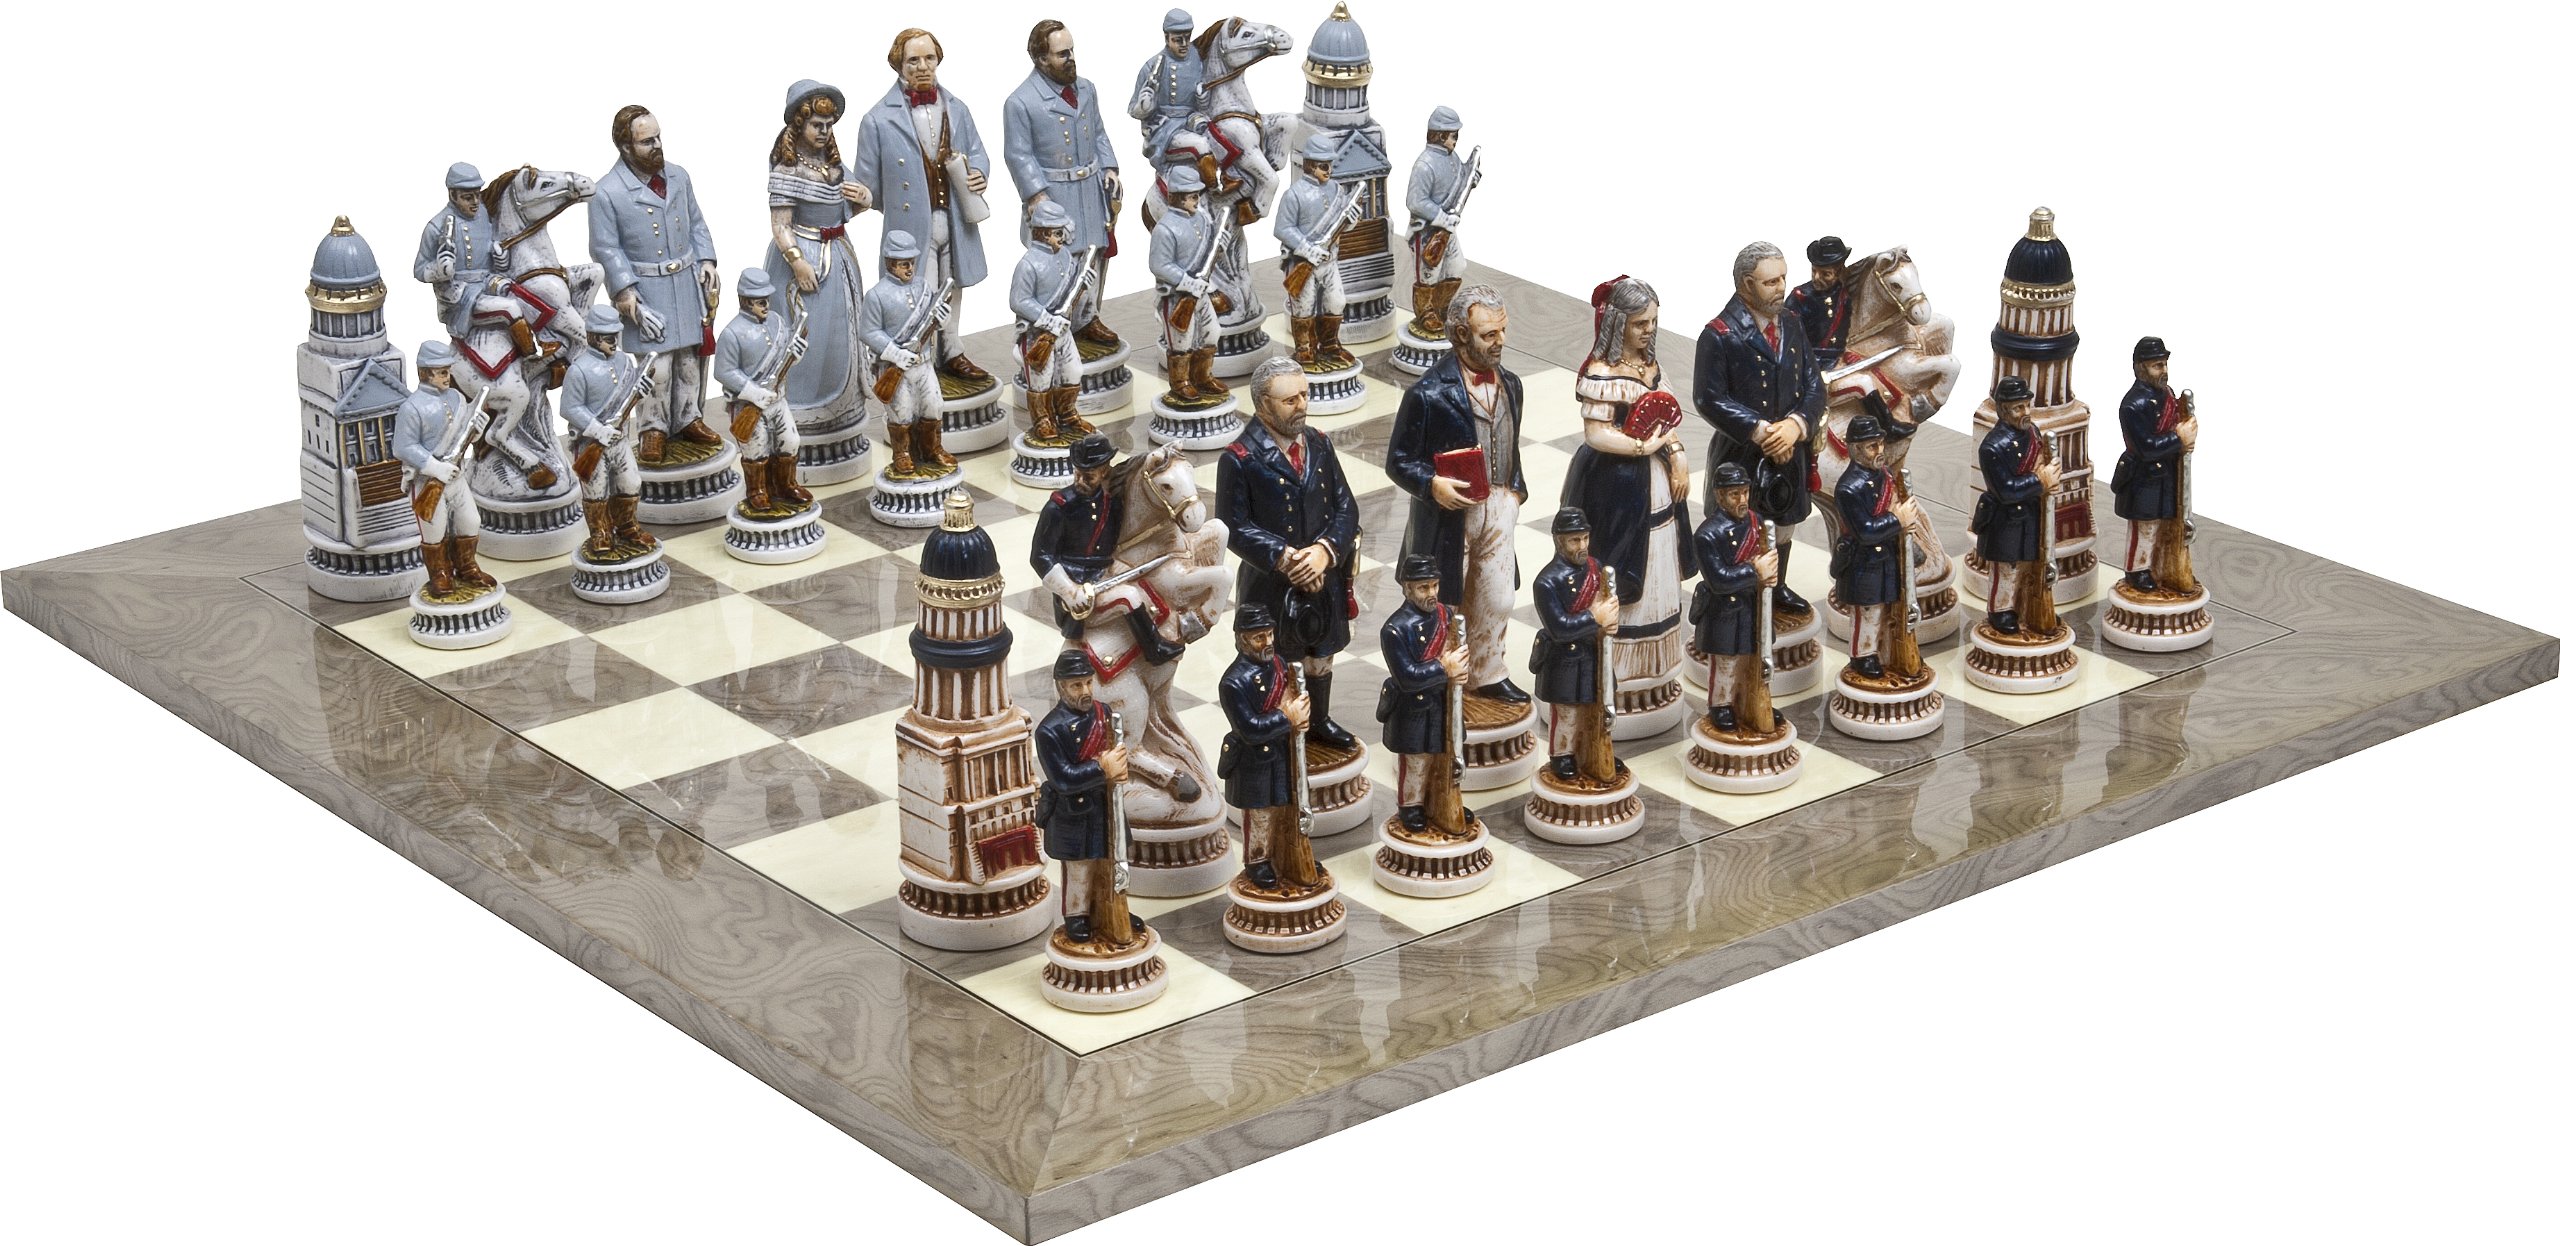 Bello Games Collezioni-American Civil War Luxury Chessmen from Italy & Greenwich Street Chess Board. Giant Size King: 5 5/8